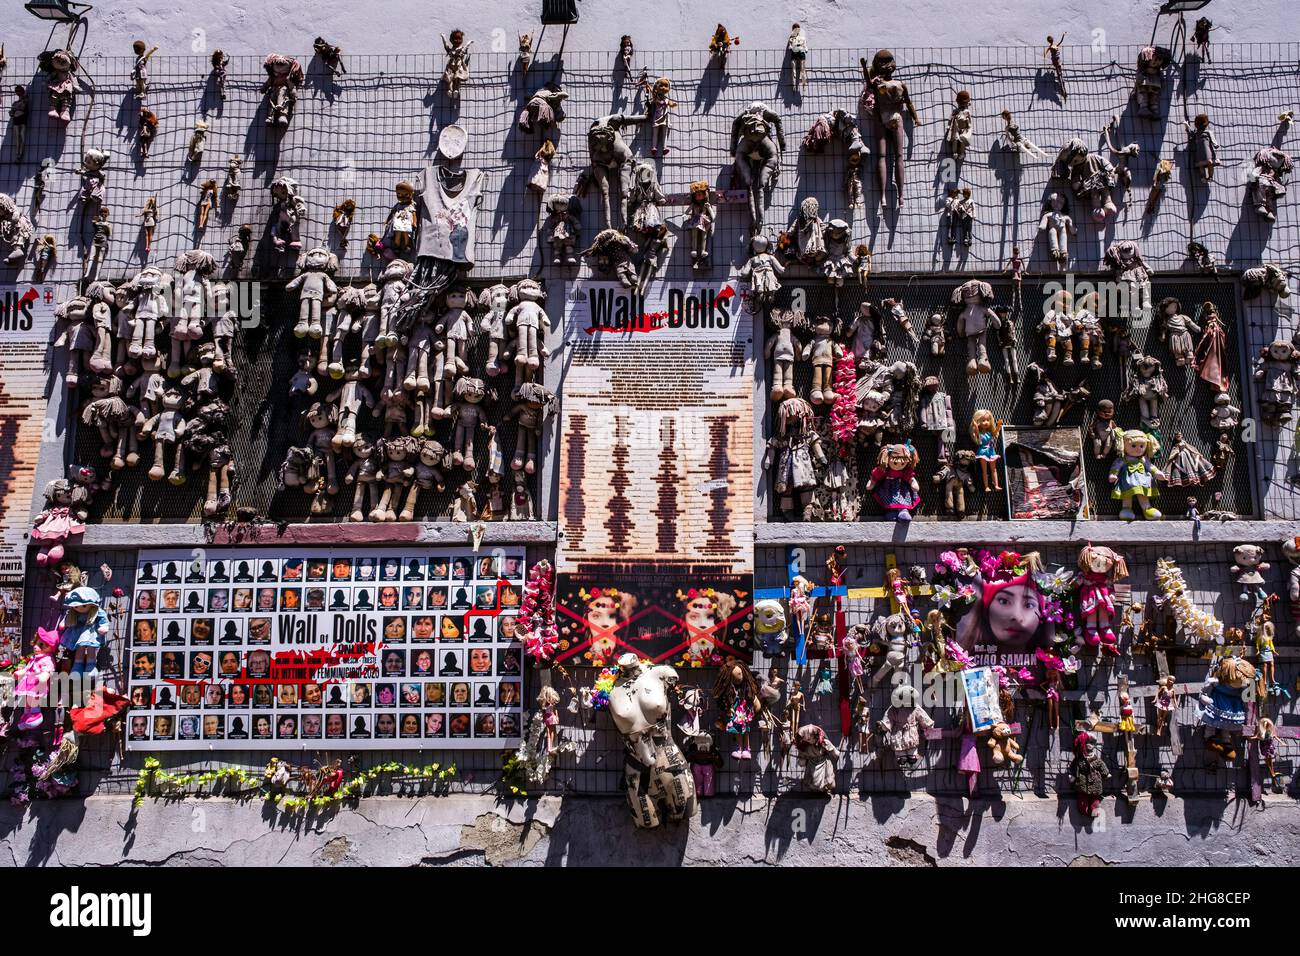 The Wall of the Dolls, il Muro delle Bambole, an art installation, that raises awareness of violence against women. Stock Photo